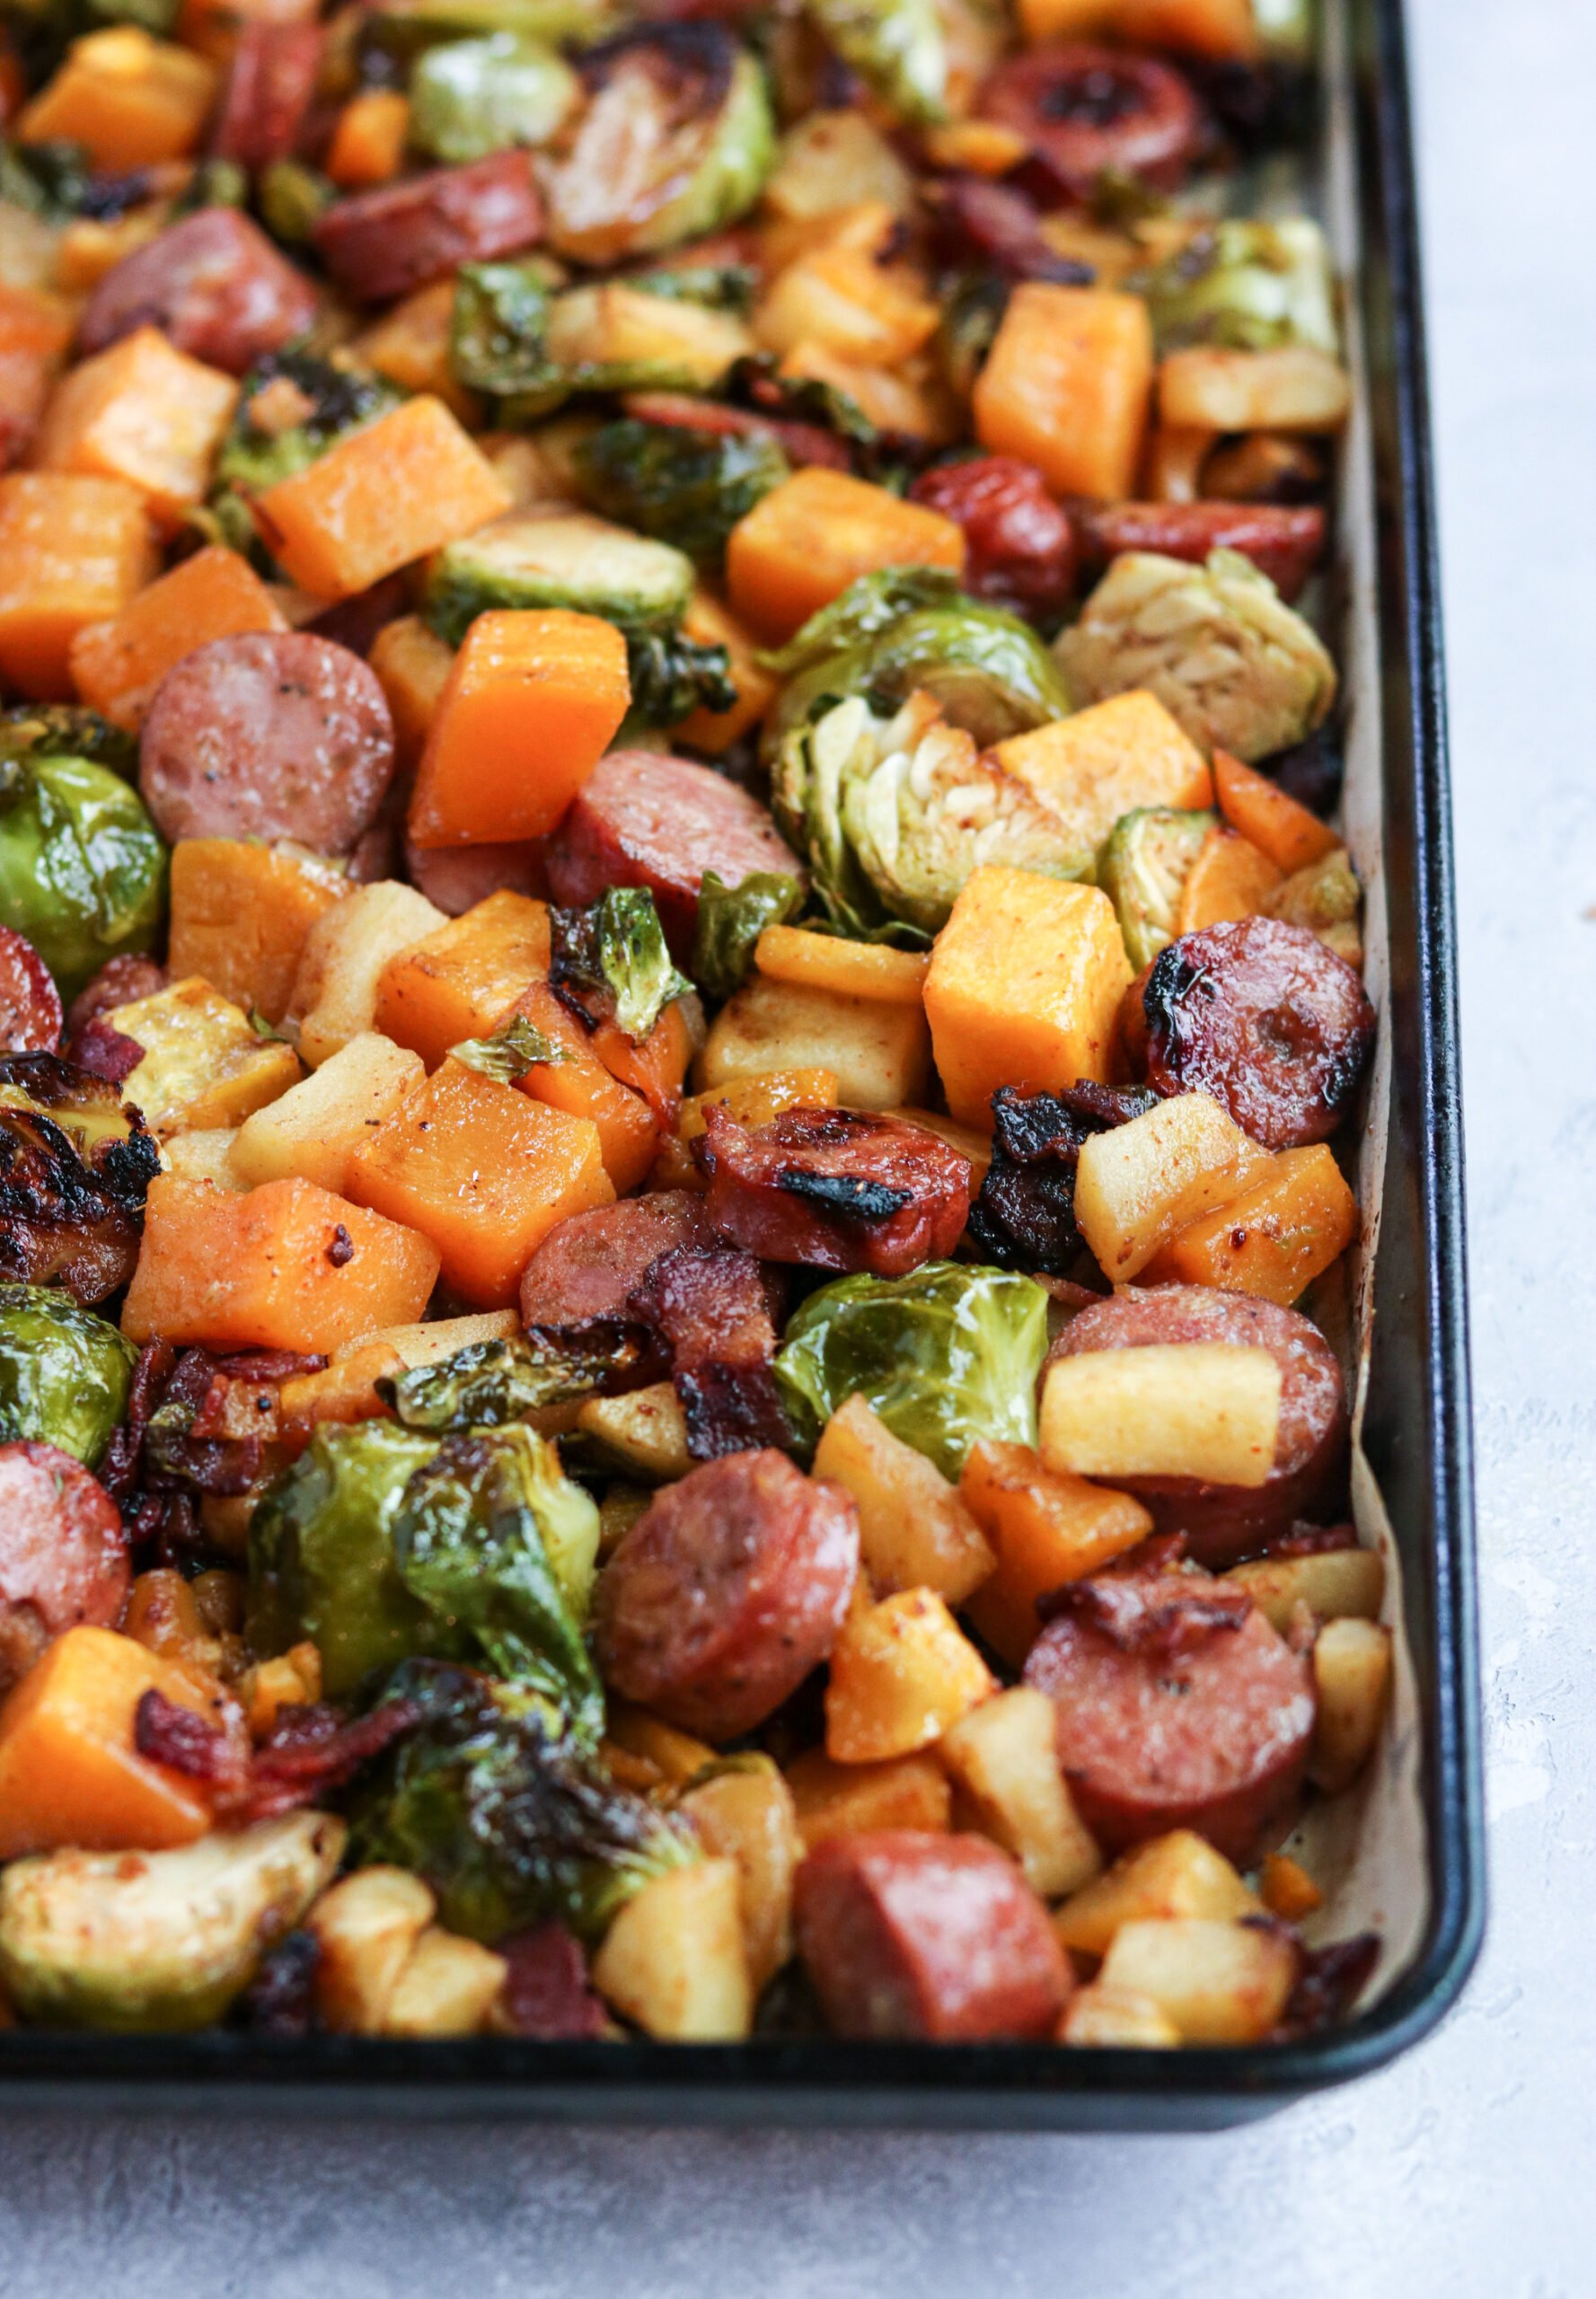 Whole30 Harvest Sheet Pan Dinner - Mary's Whole Life